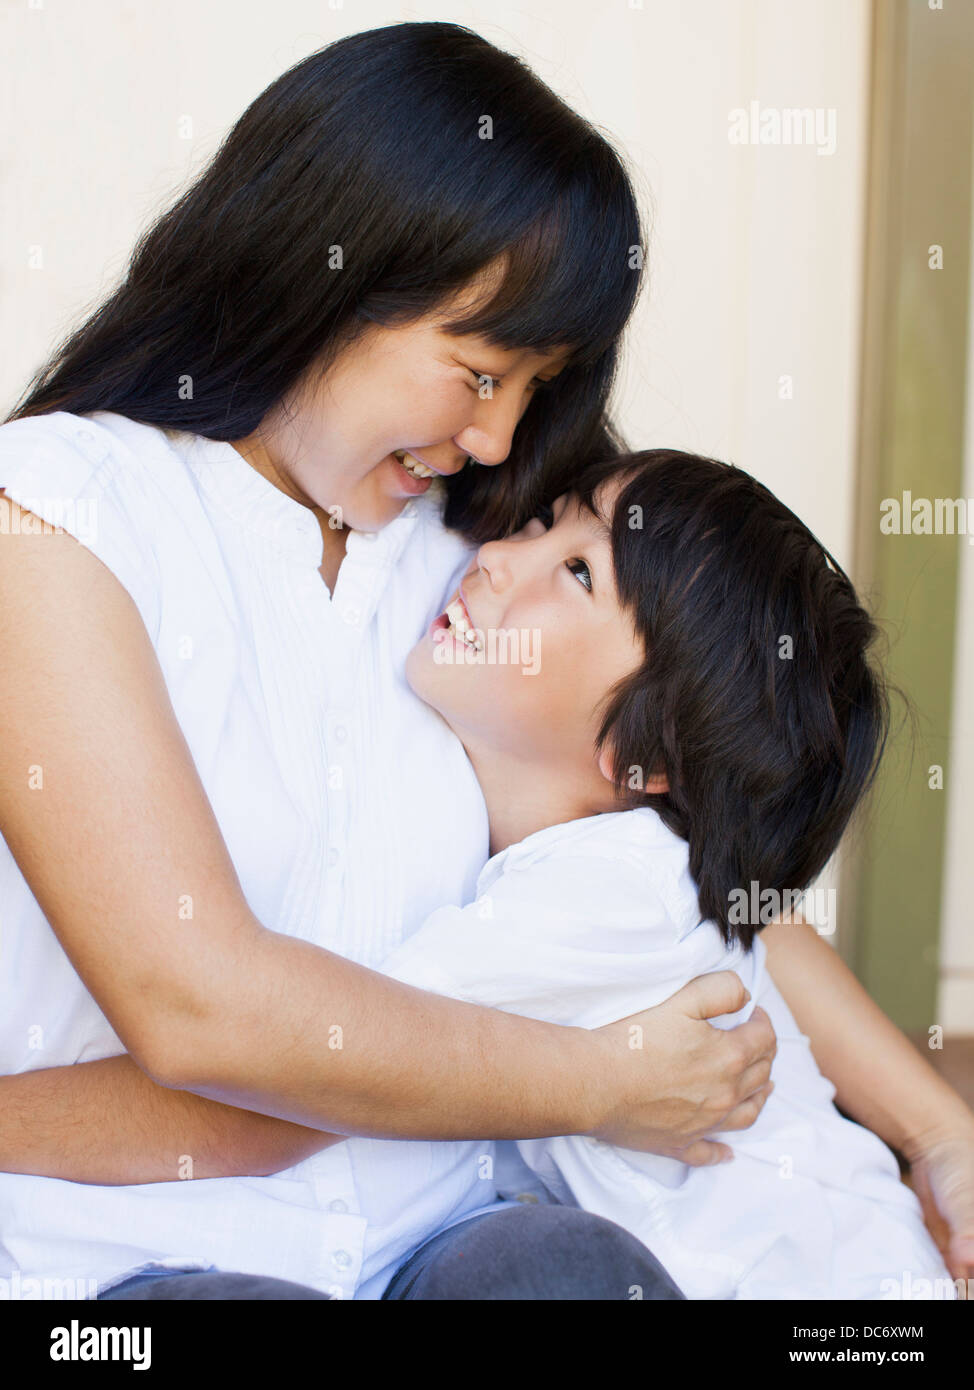 Boy (8-9) embracing mother Stock Photo